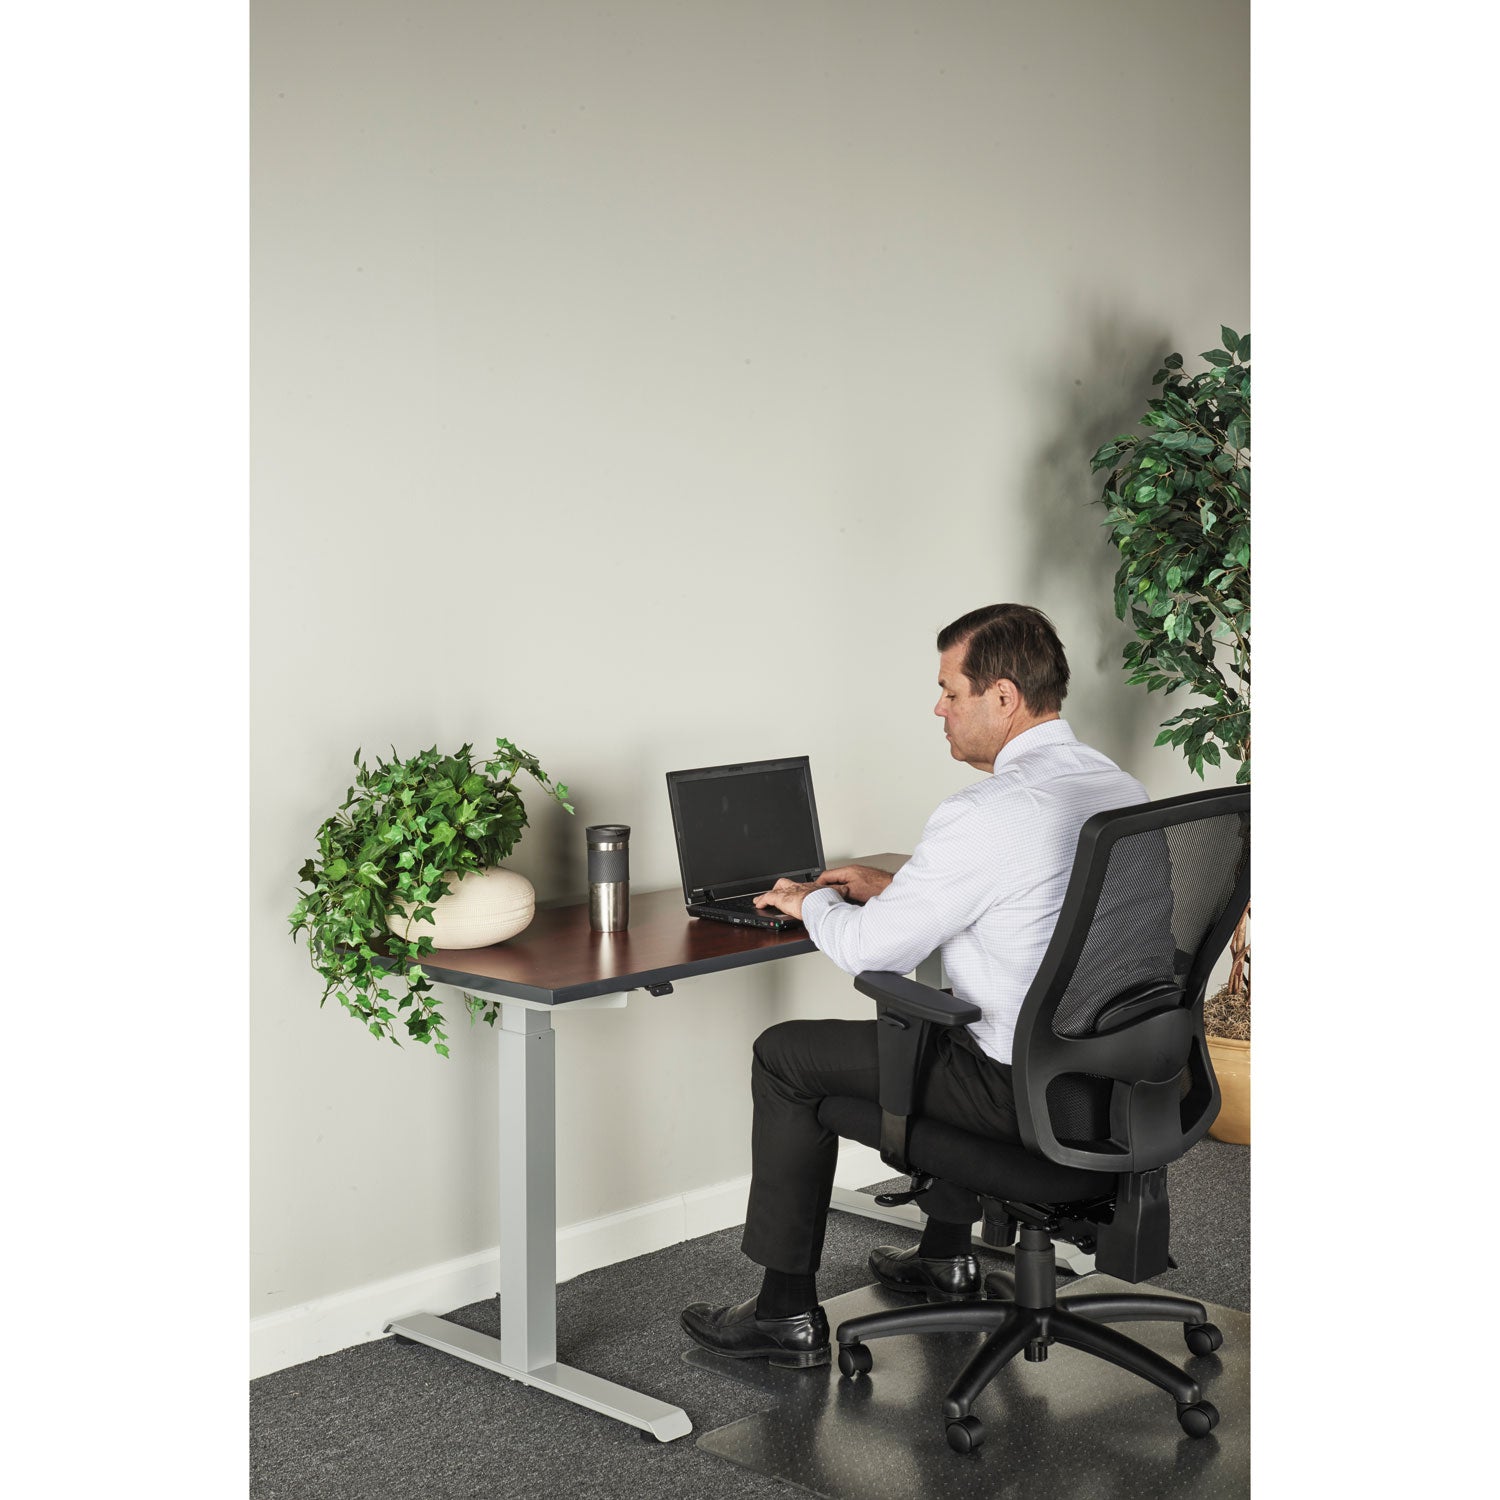 adaptivergo-sit-stand-two-stage-electric-height-adjustable-table-base-4806-x-2435-x-275-to-472-gray_aleht2ssg - 6